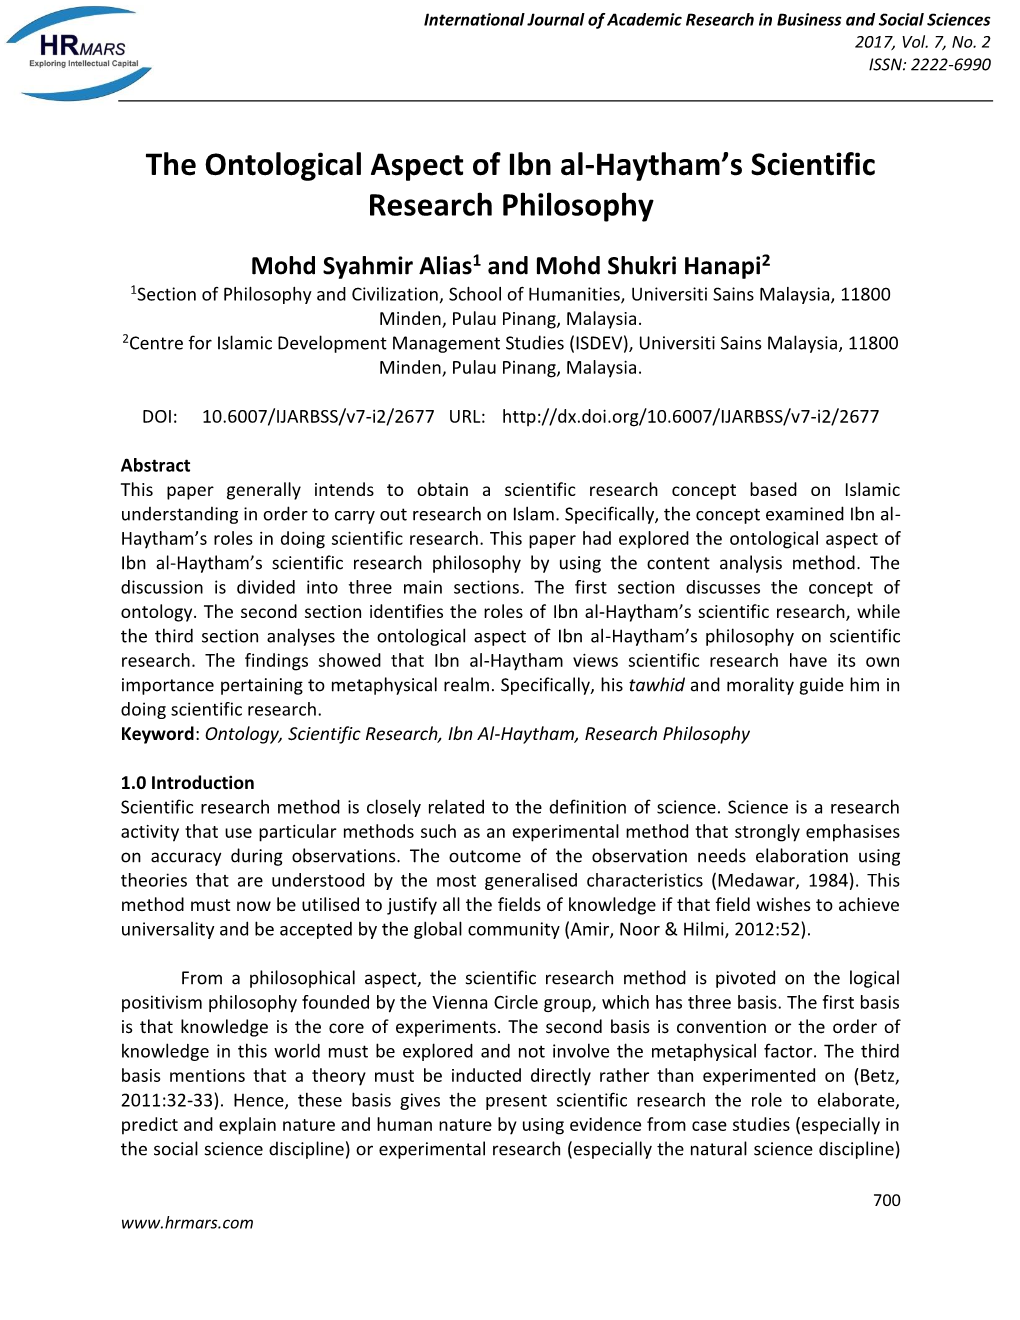 The Ontological Aspect of Ibn Al-Haytham's Scientific Research